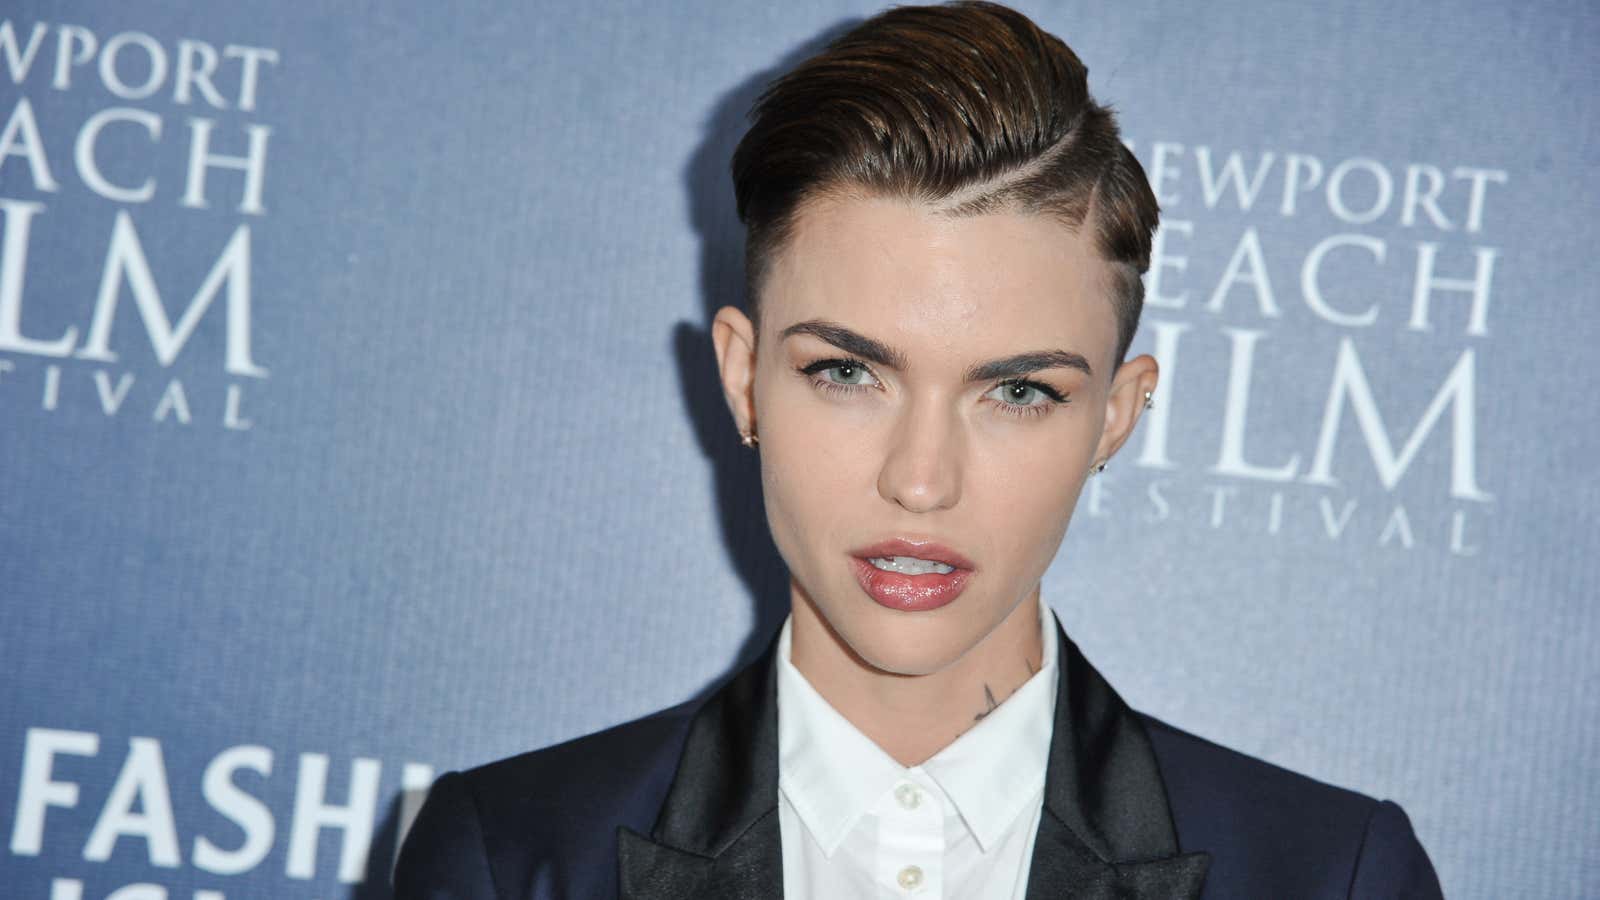 Orange is the New Black’s breakout new star has a message—and a sultry red carpet look.